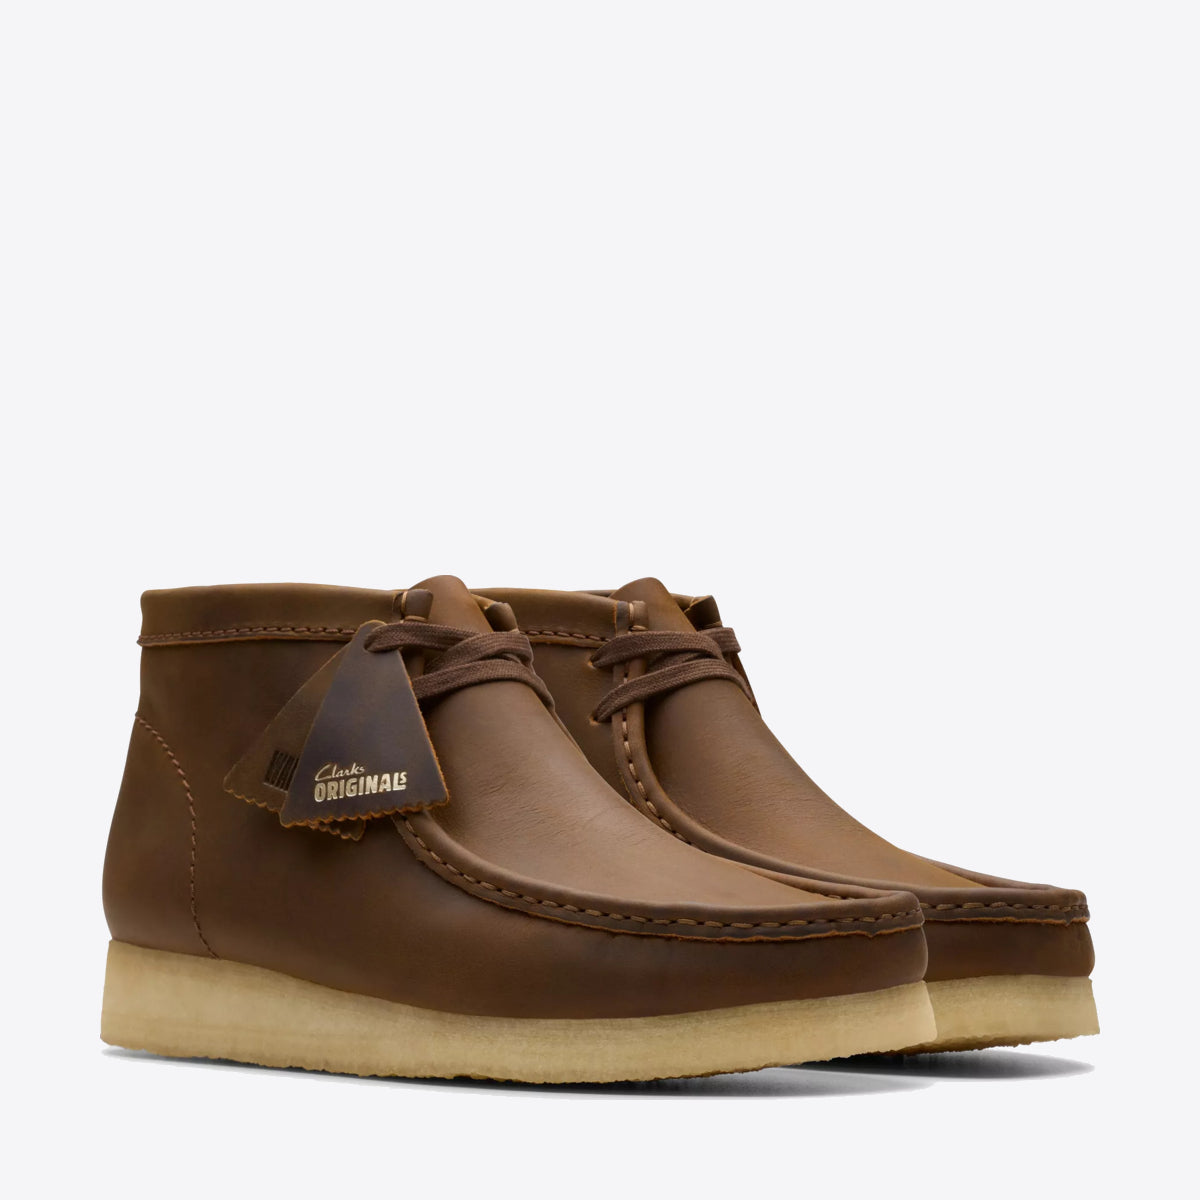 CLARKS Wallabee Boot Leather Beeswax - Image 4